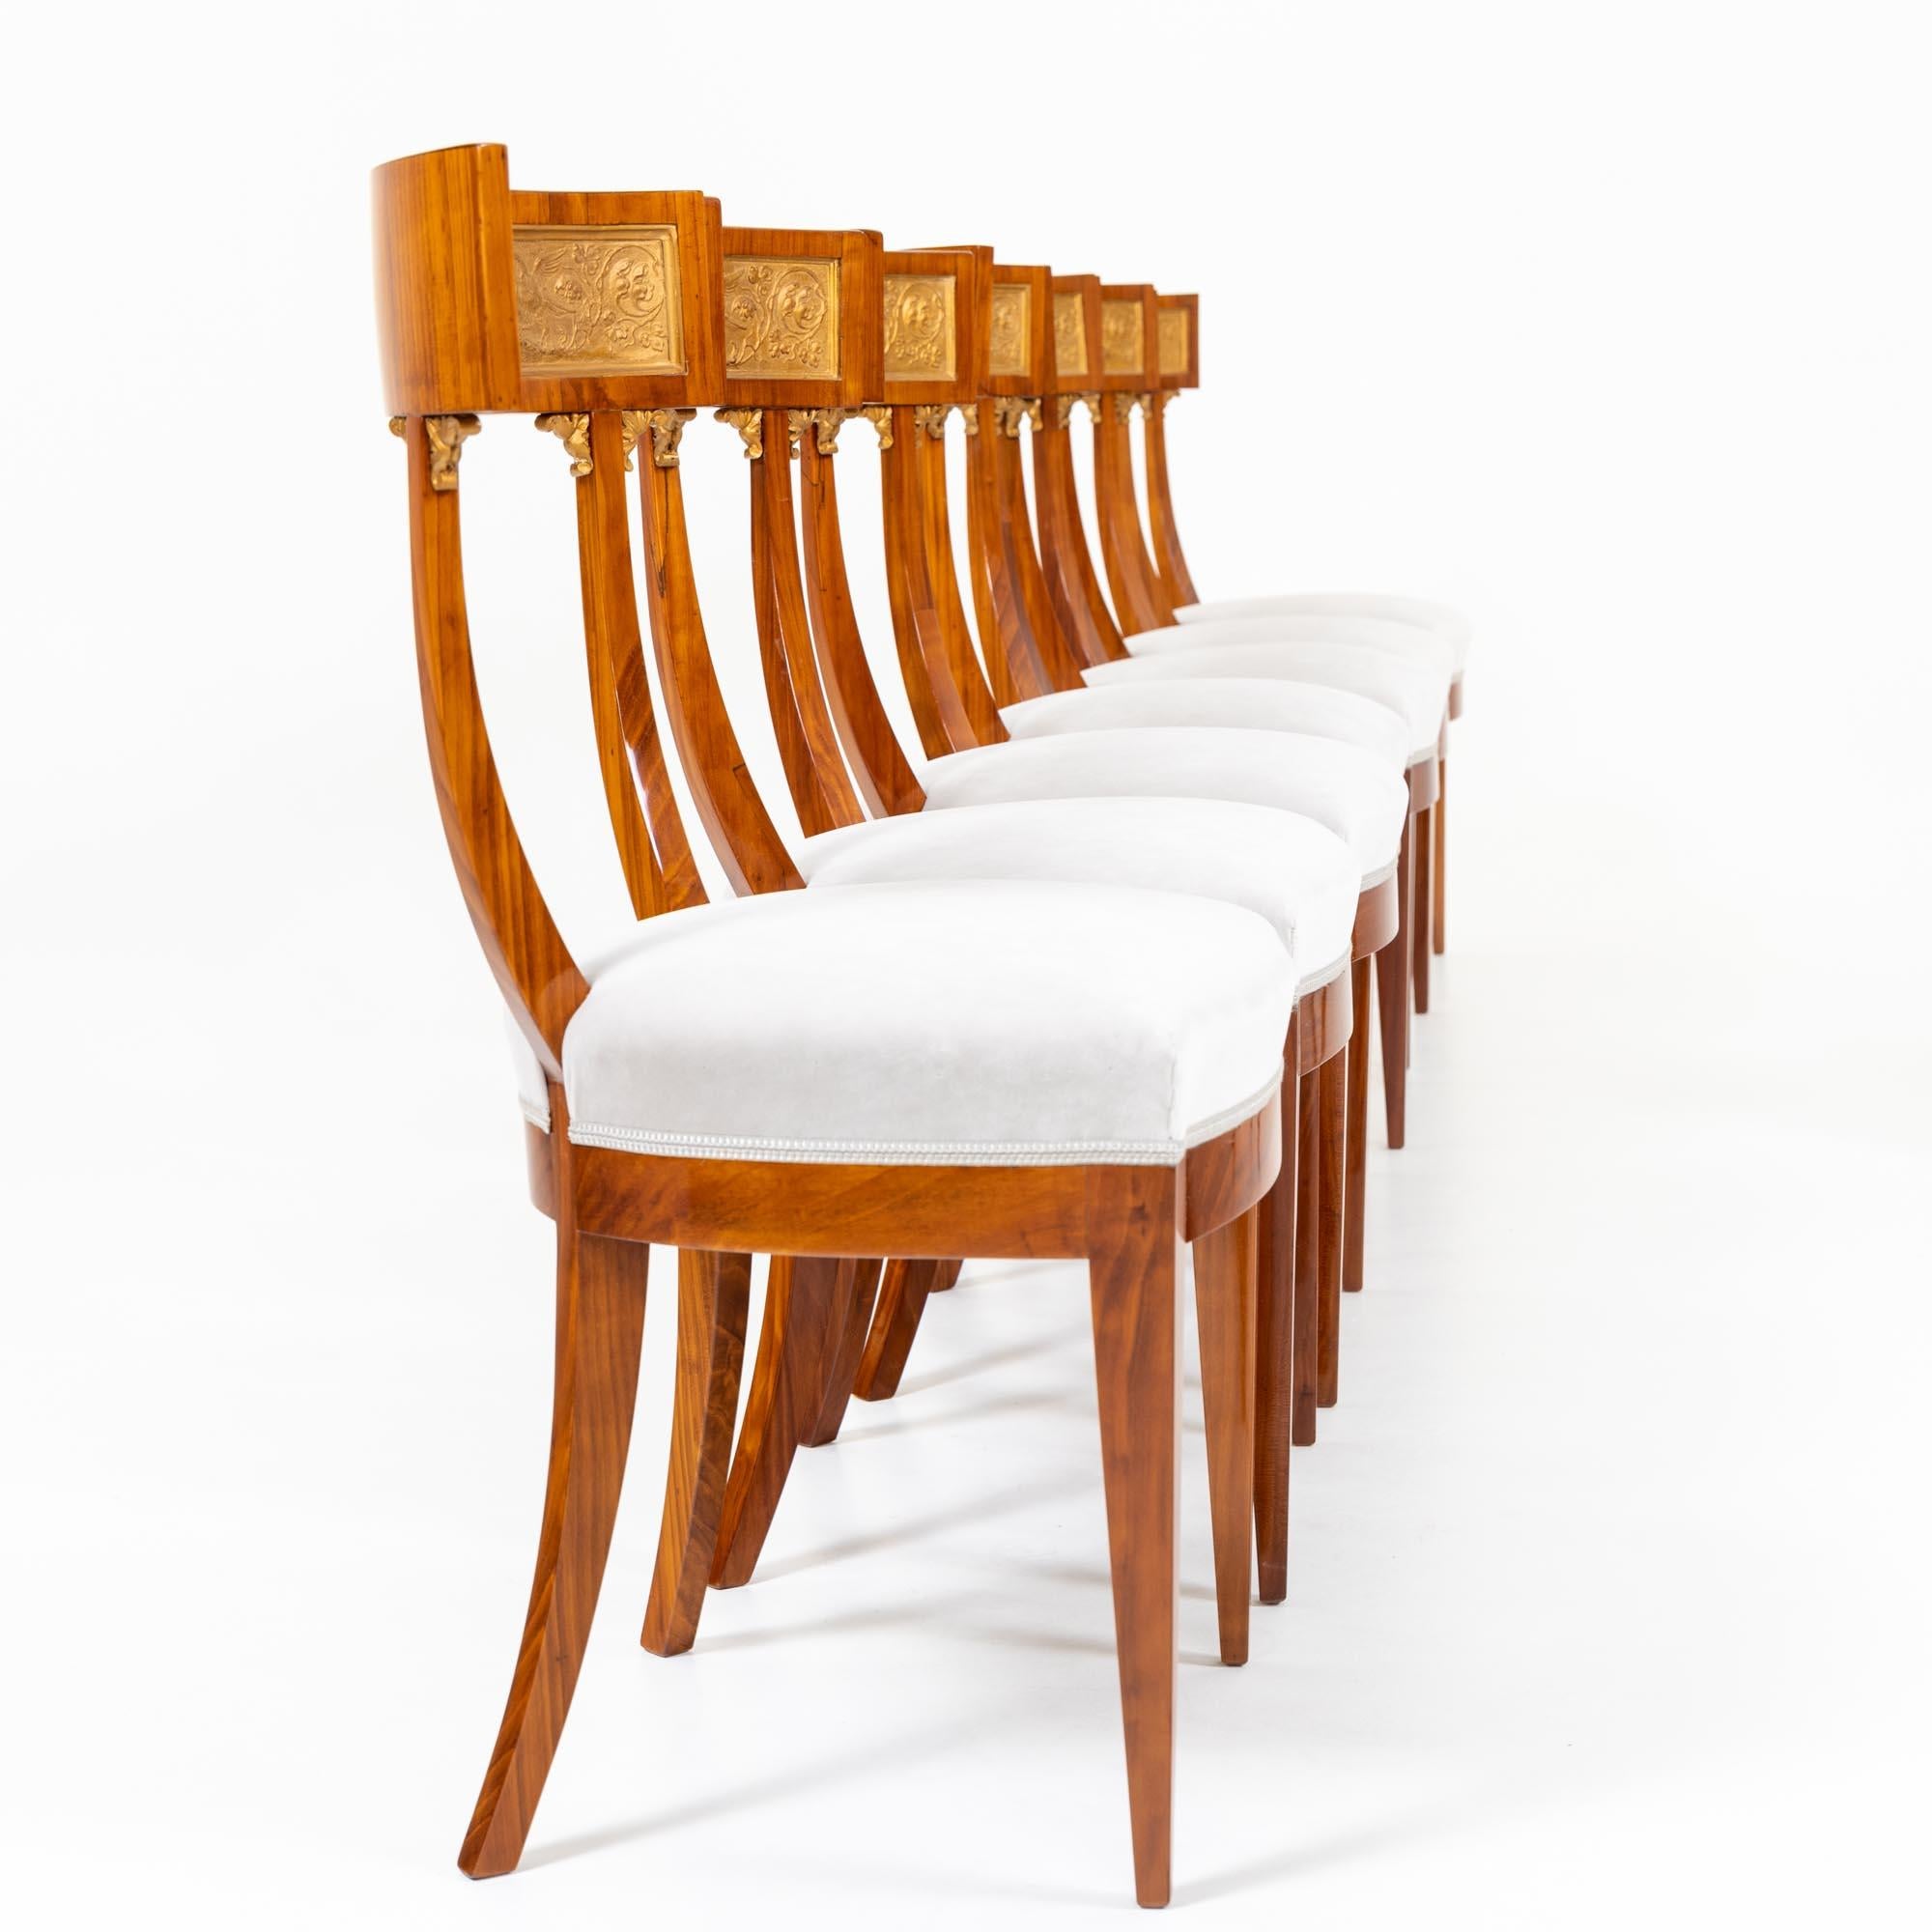 Eight Neoclassical Dining Chairs in Cherry Wood, Tuscany, 19th Century For Sale 1